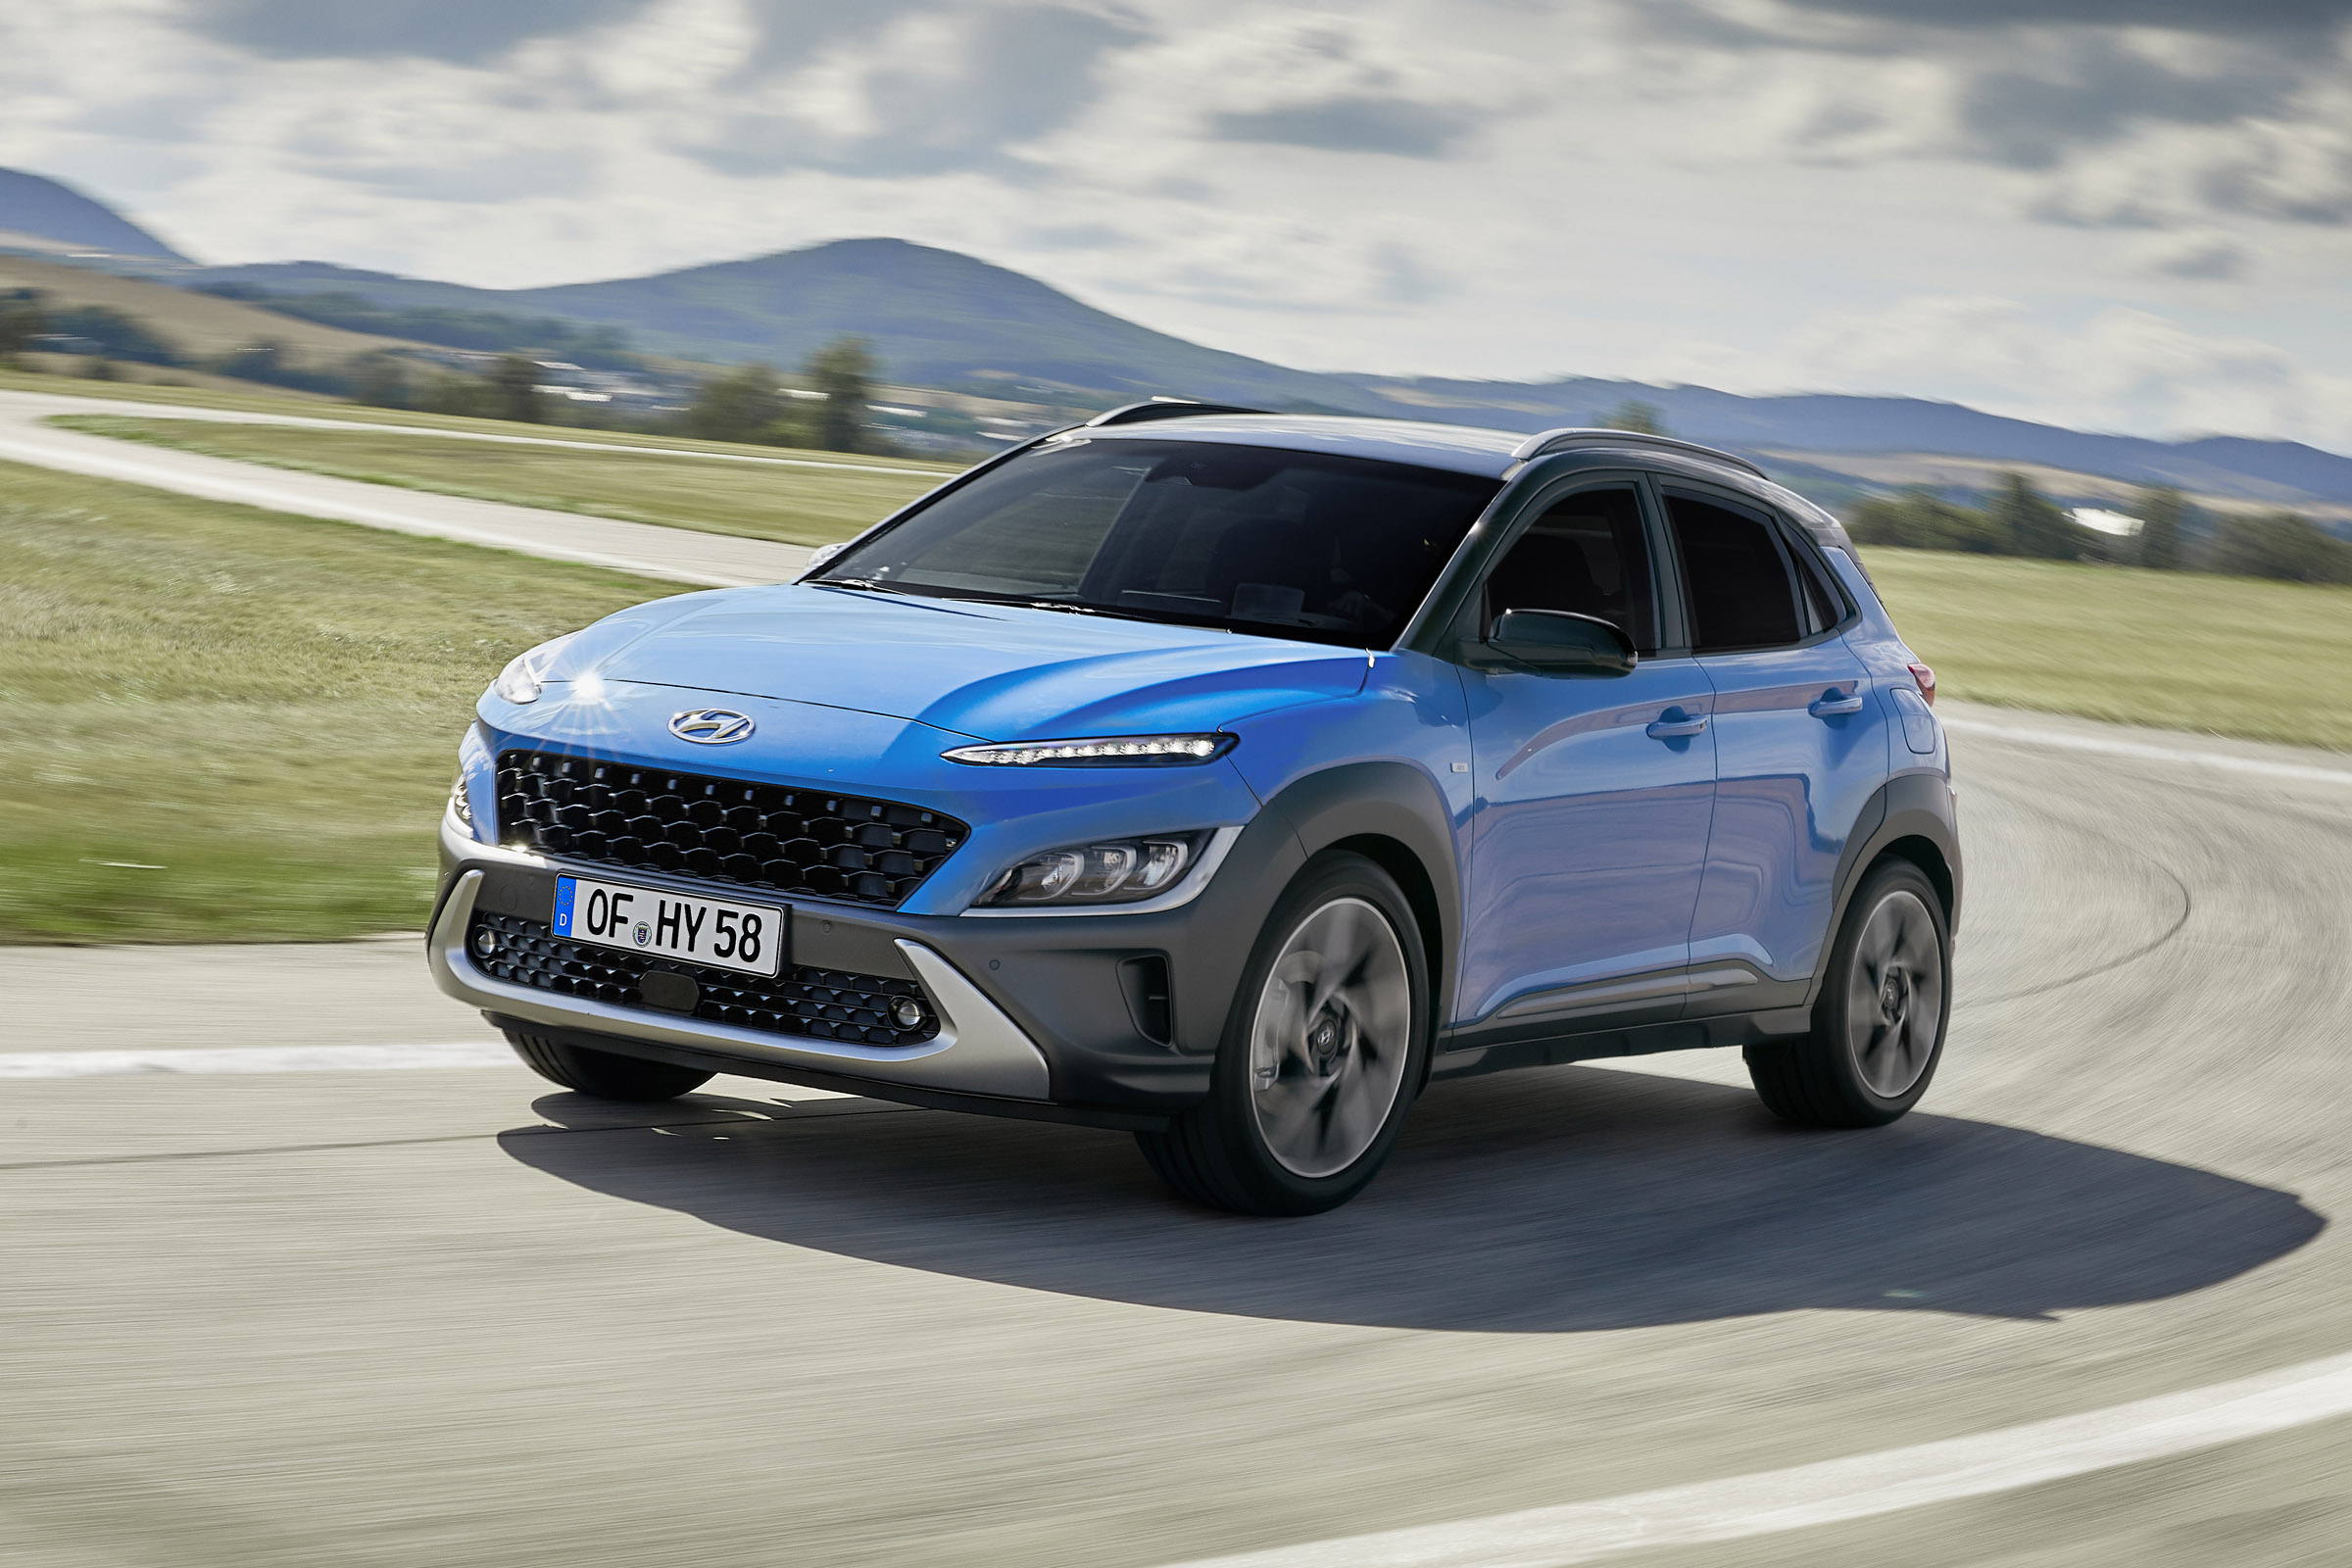 20 Hyundai Kona Hybrid prices, specification and on sale date ...